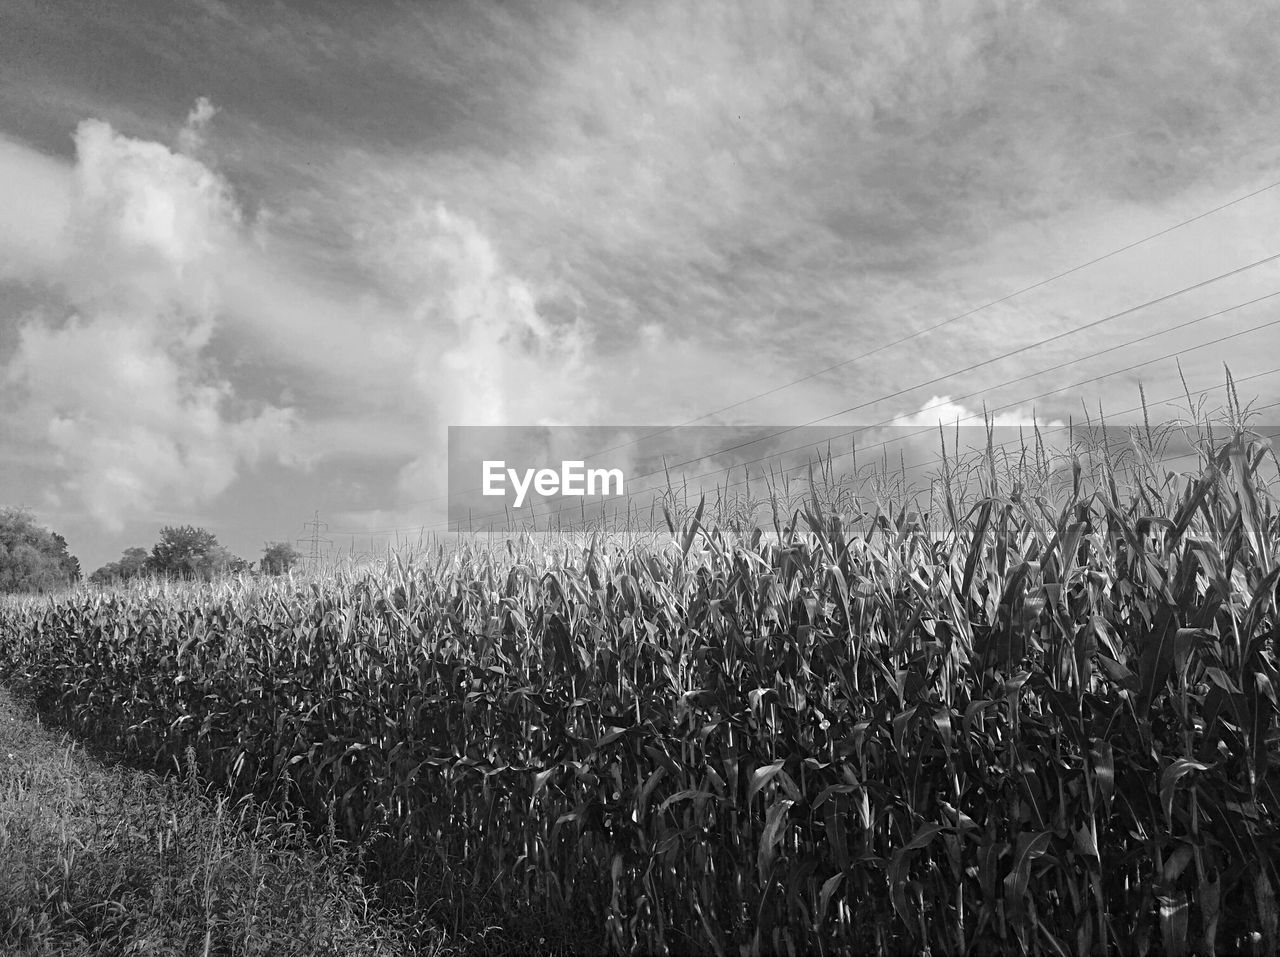 sky, landscape, cloud, field, plant, black and white, land, crop, agriculture, rural scene, environment, cereal plant, growth, nature, monochrome photography, monochrome, corn, beauty in nature, grass, no people, scenics - nature, farm, tranquility, outdoors, day, horizon, food, tranquil scene, rural area, barley